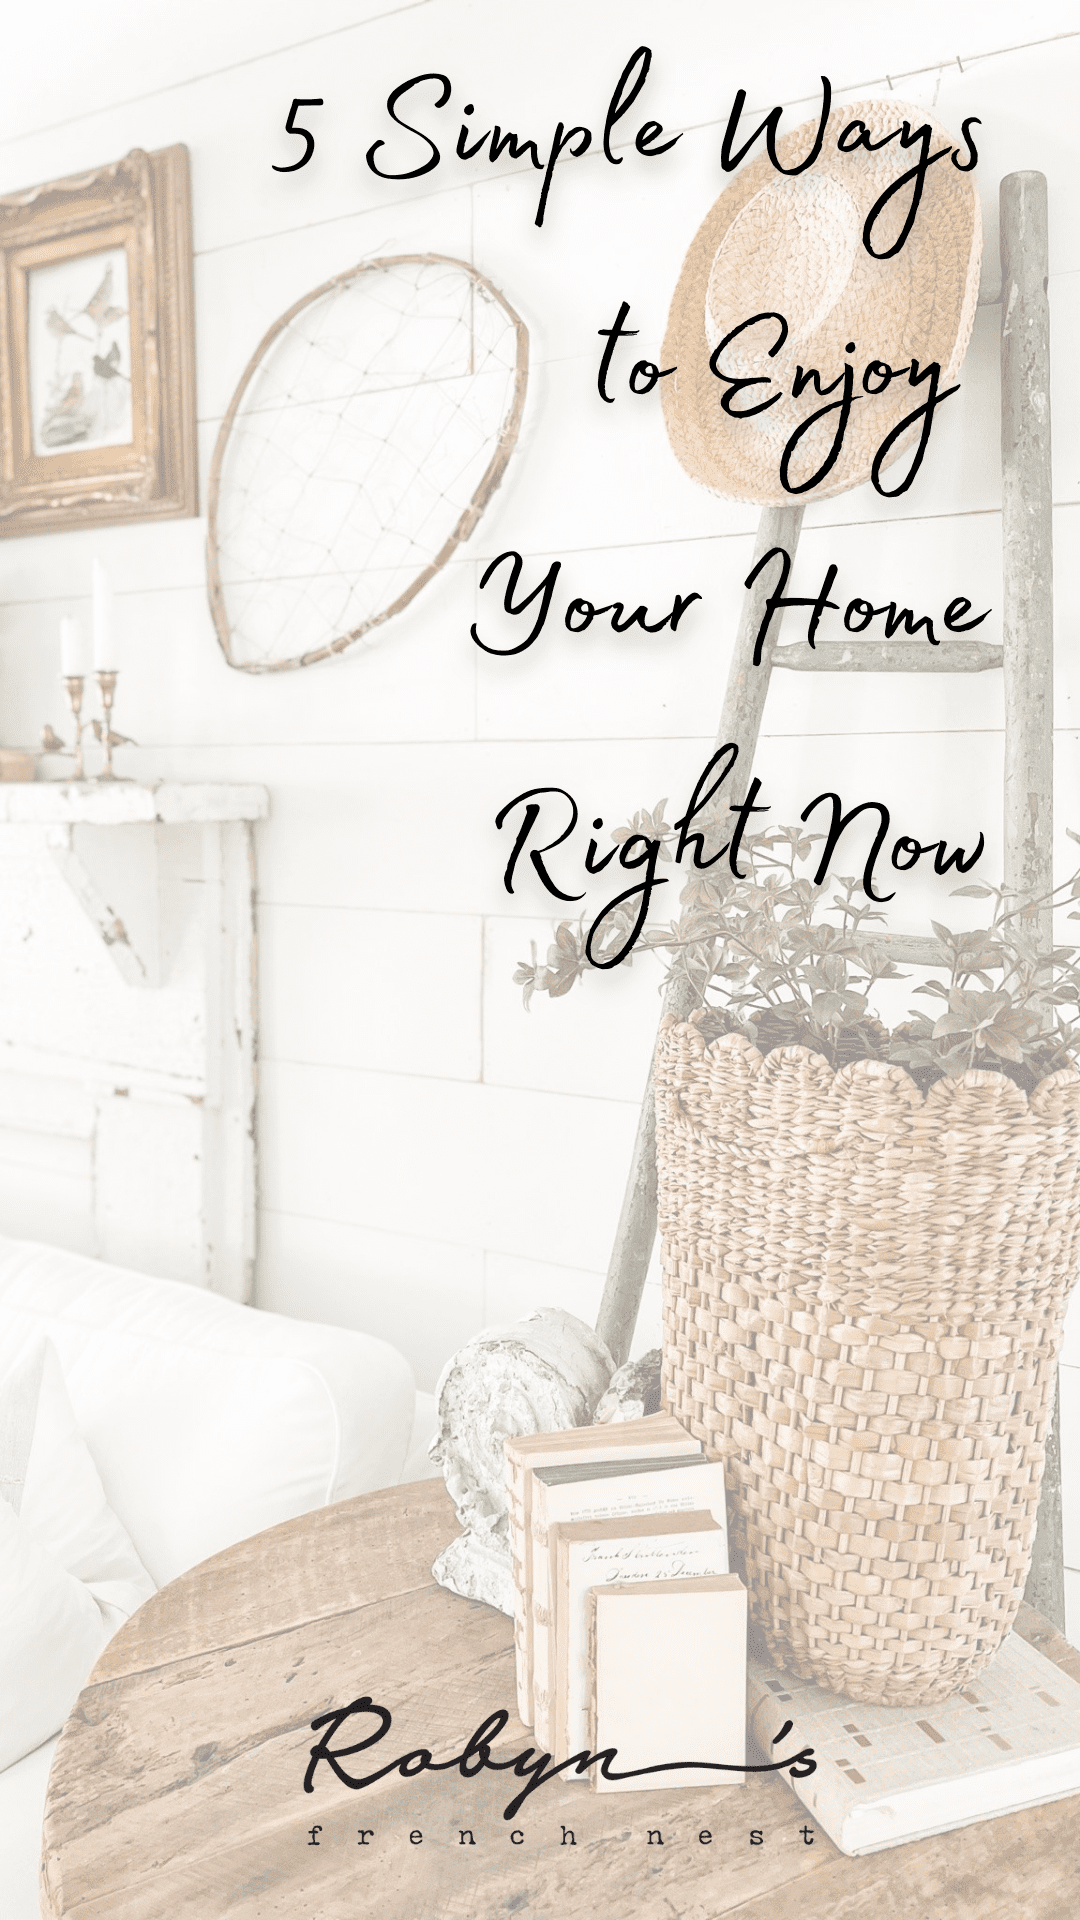 5 Simple Ways to Enjoy Your Home Right Now